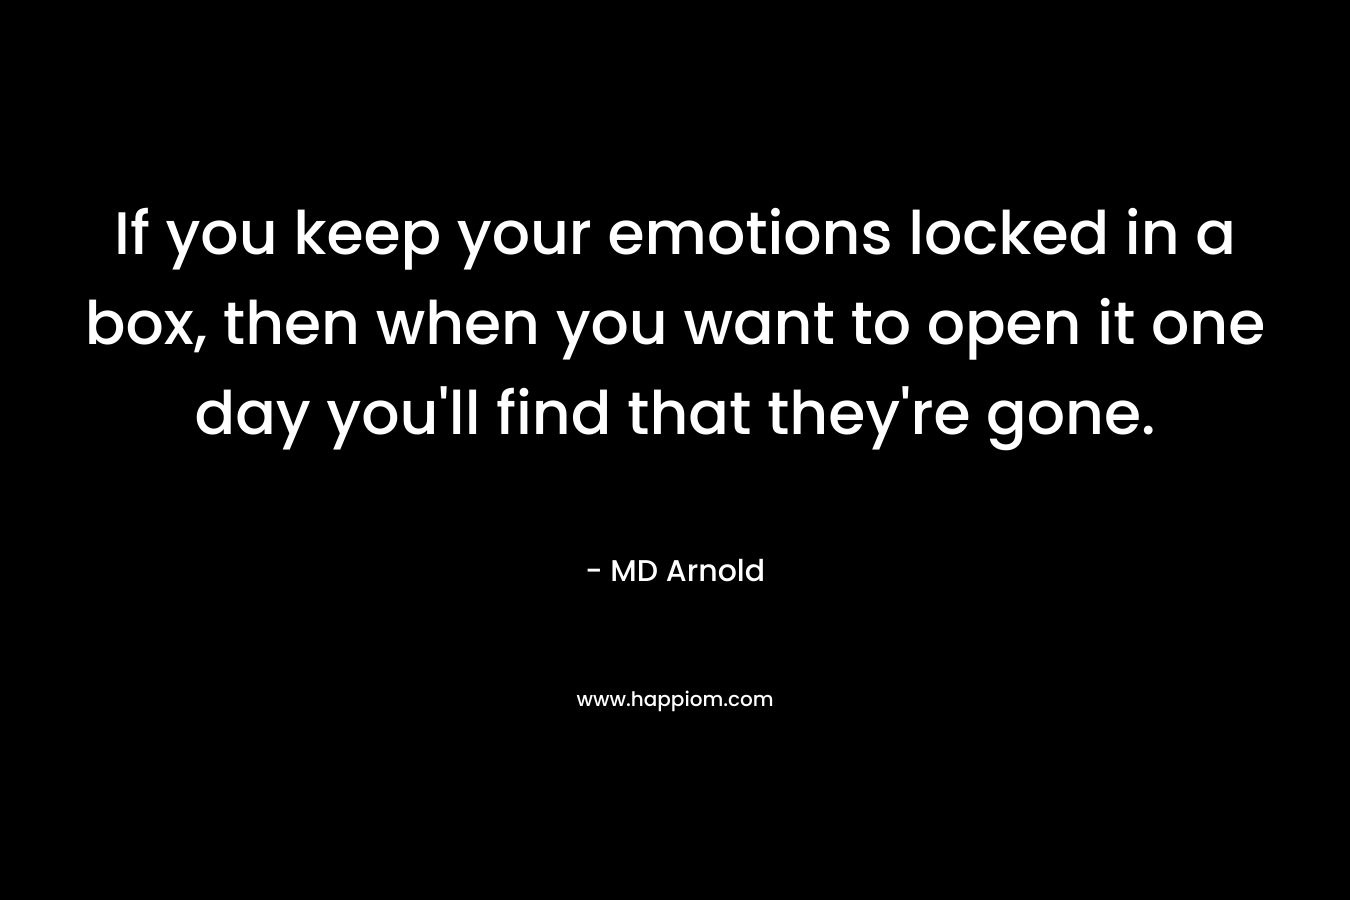 If you keep your emotions locked in a box, then when you want to open it one day you'll find that they're gone.